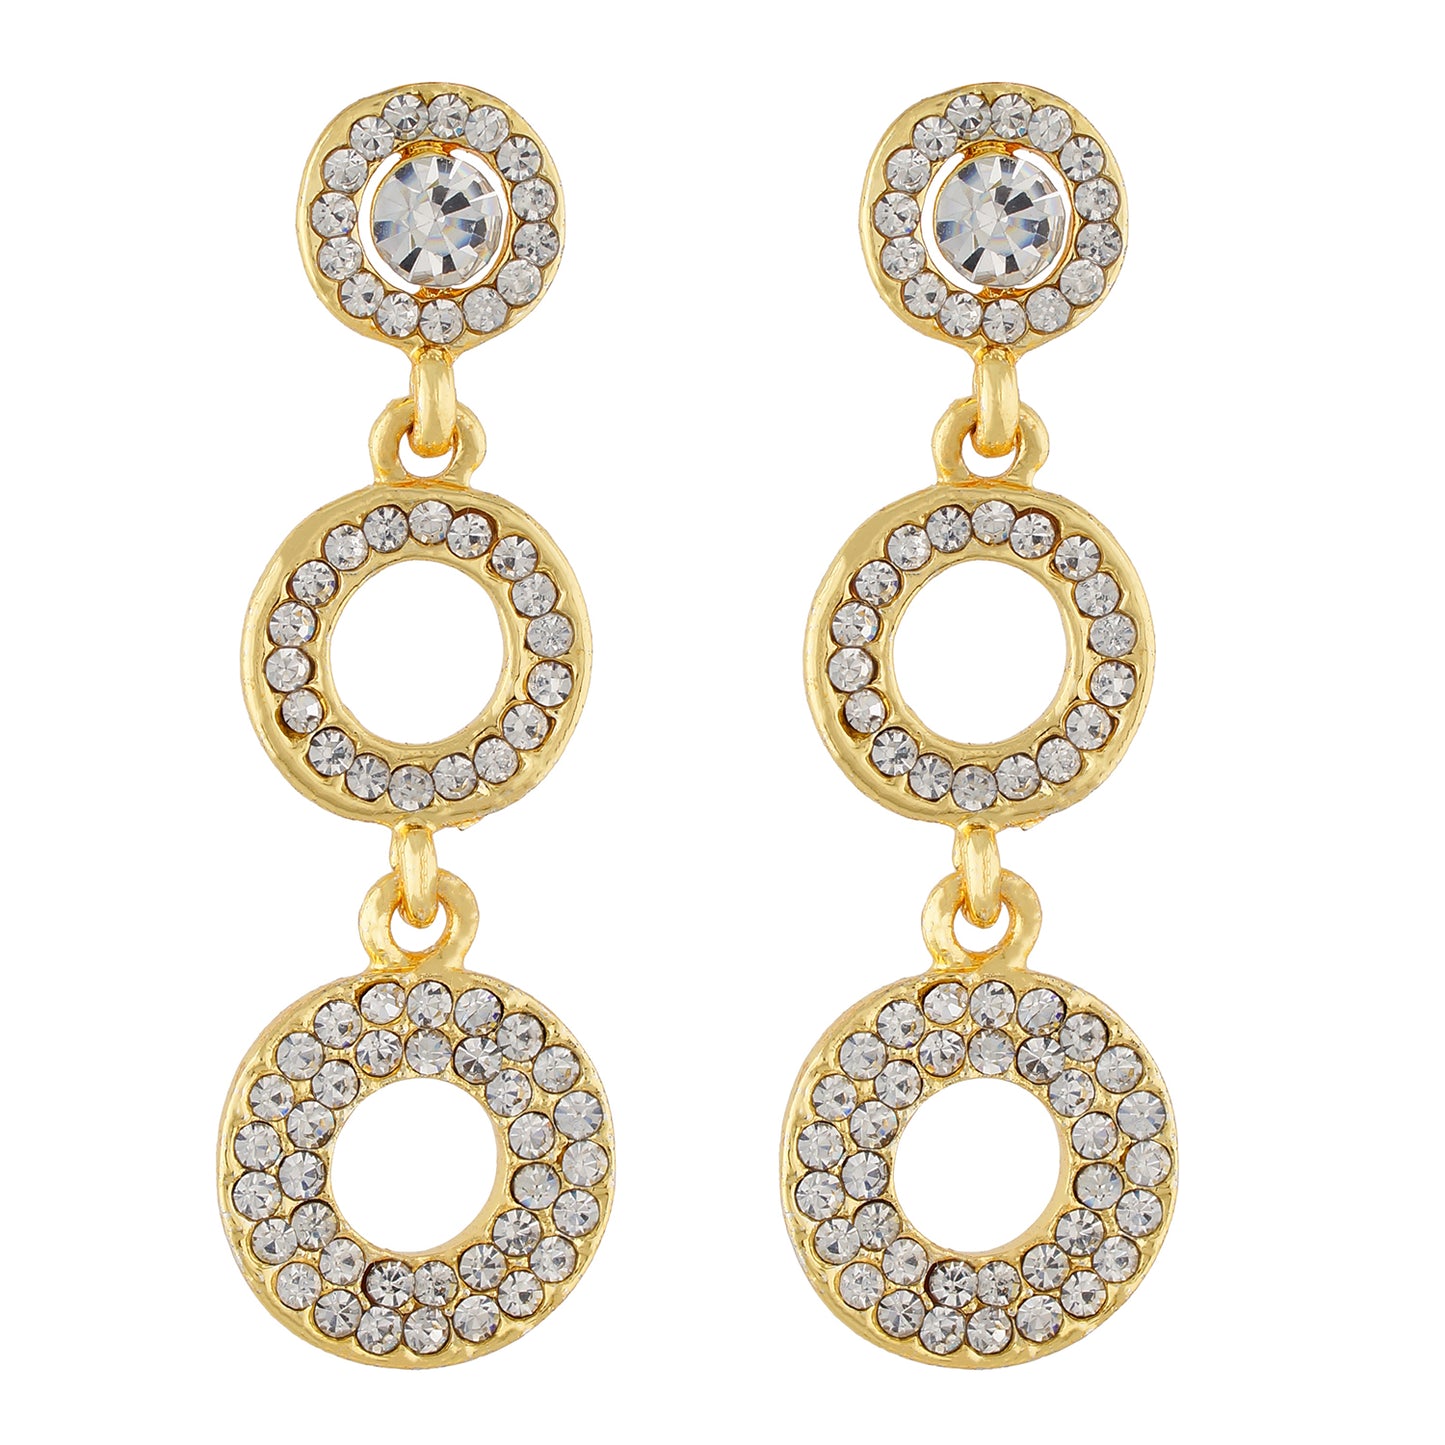 Awesome Gold Colour Round Shape Earring for Girls and Women